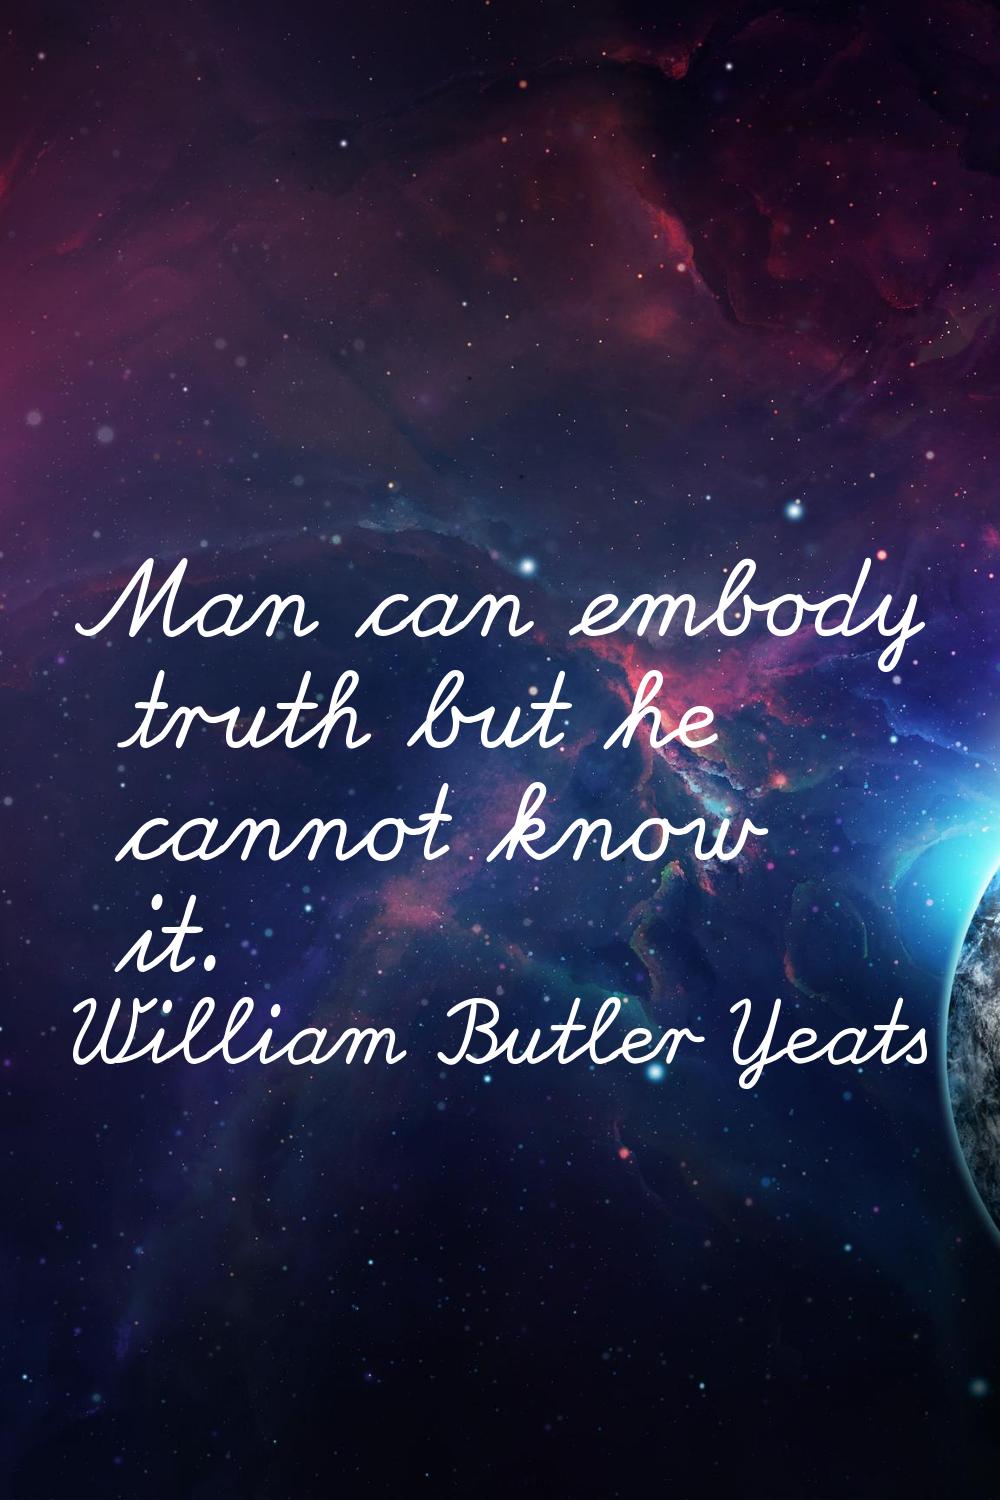 Man can embody truth but he cannot know it.